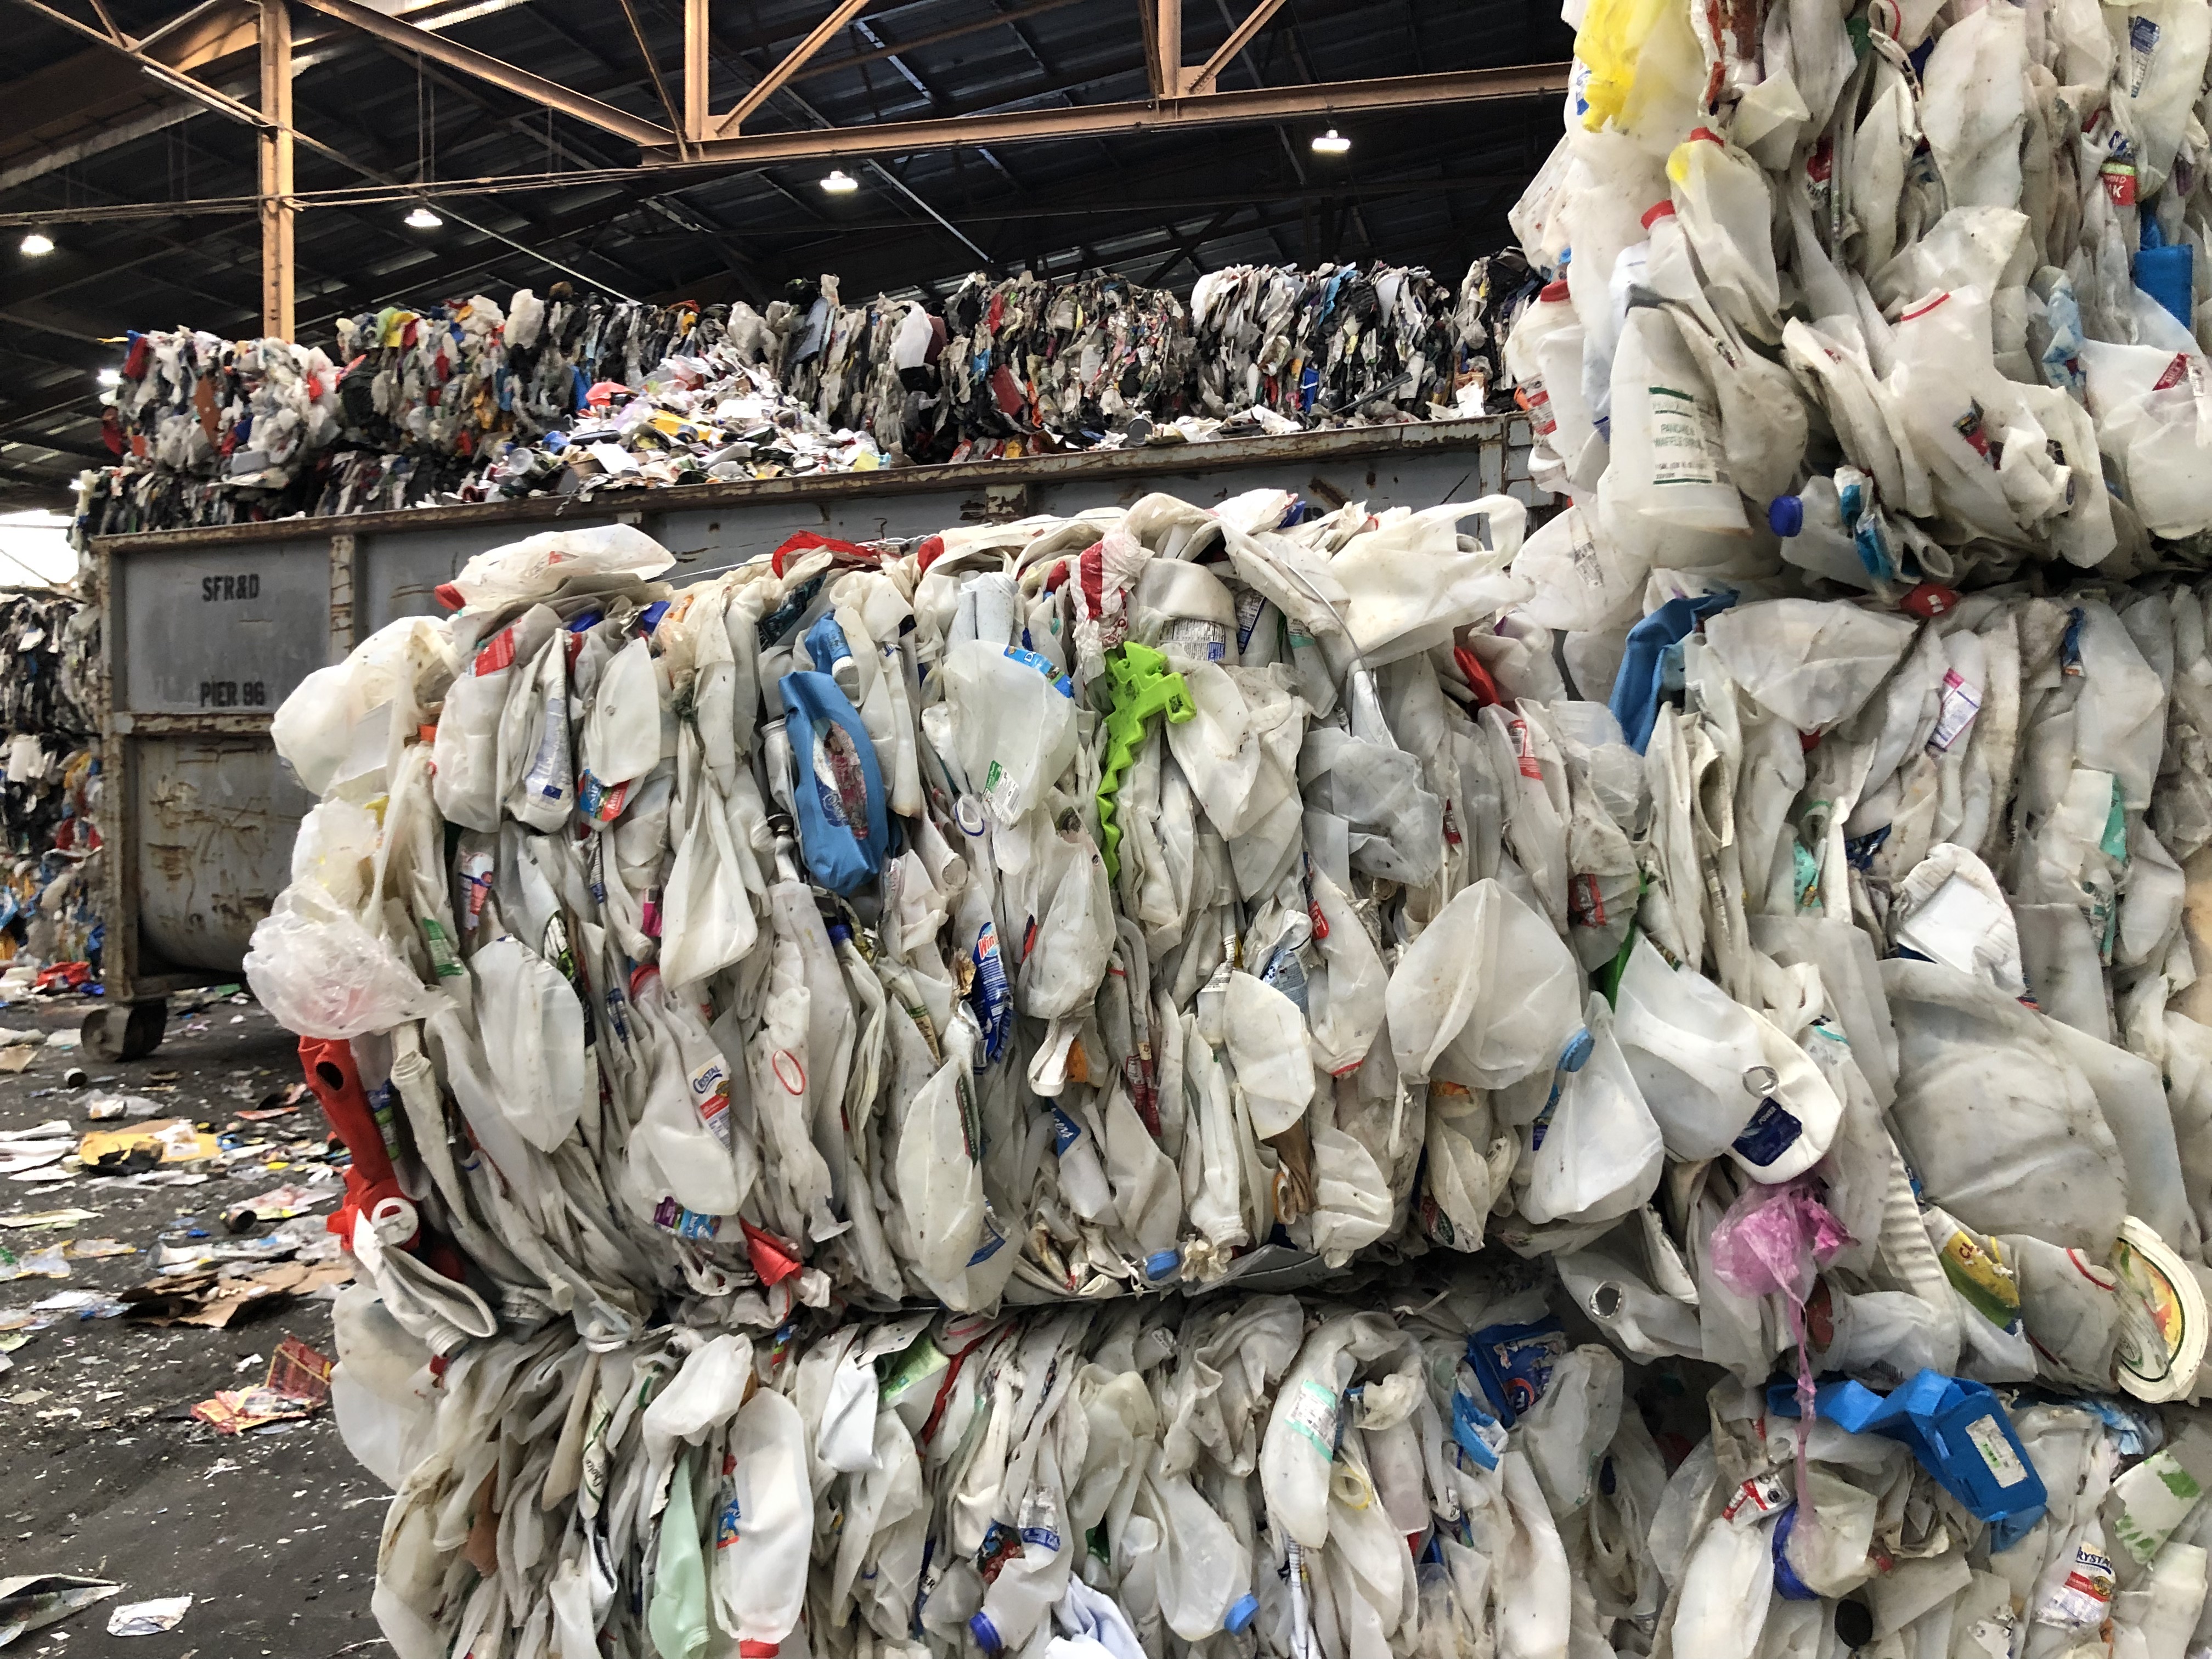 Recycled plastics are bundled for resale in a Recology plant in San Francisco (Alana Semuels/TIME)